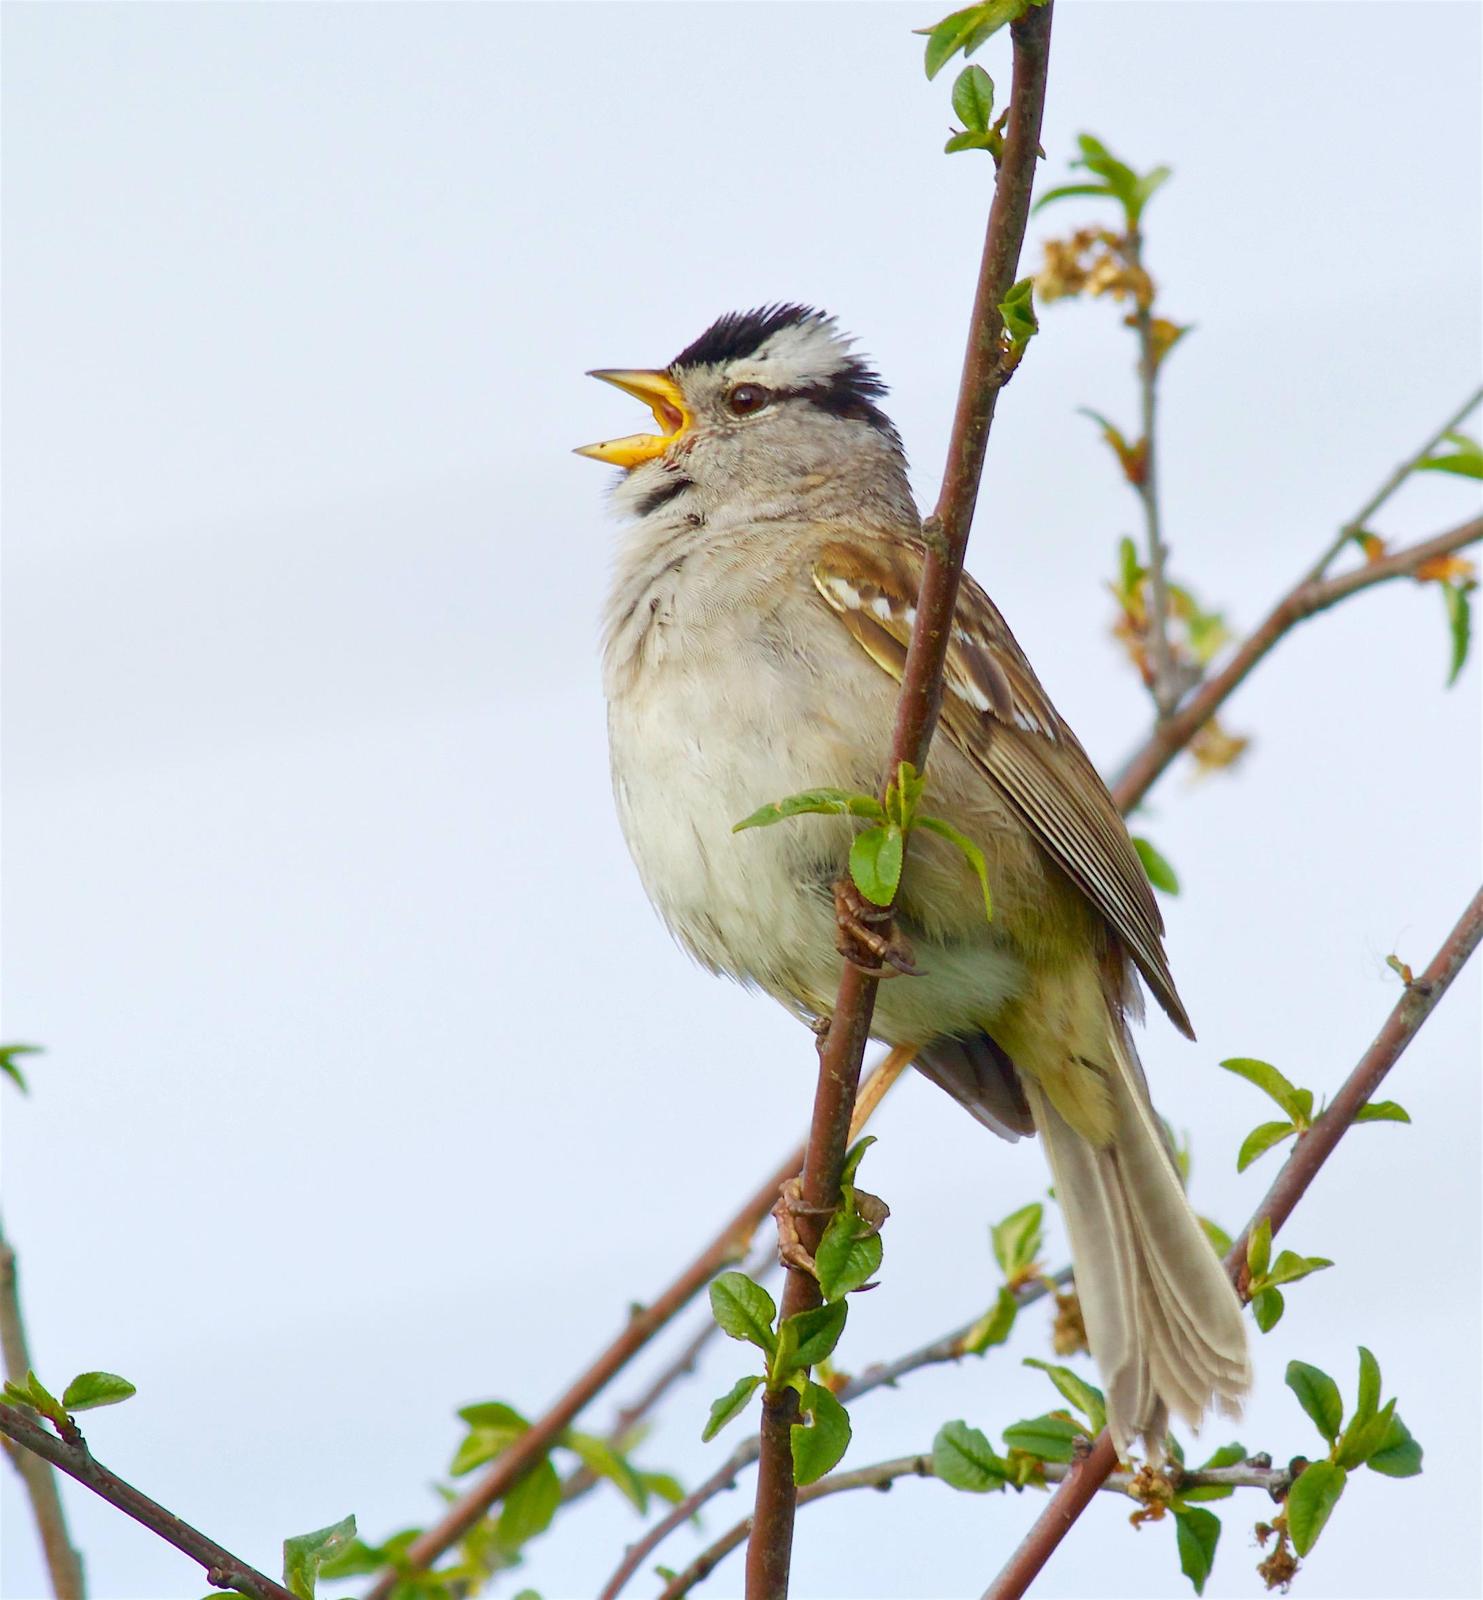 White-crowned Sparrow Photo by Kathryn Keith